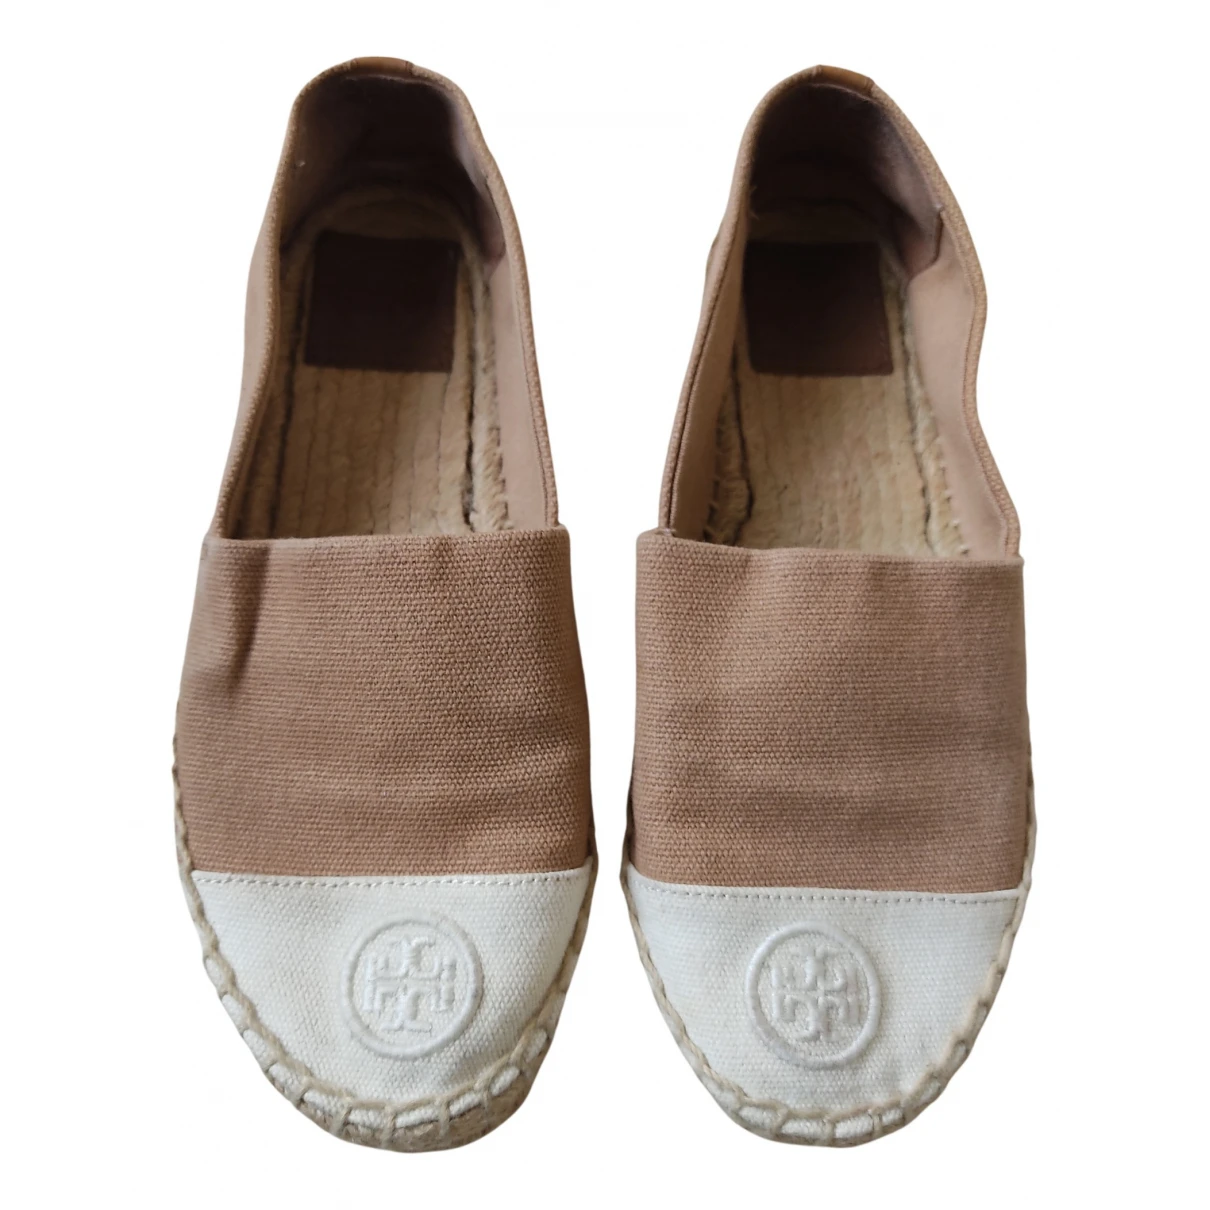 shoes Tory Burch espadrilles for Female Cloth 5 US. Used condition